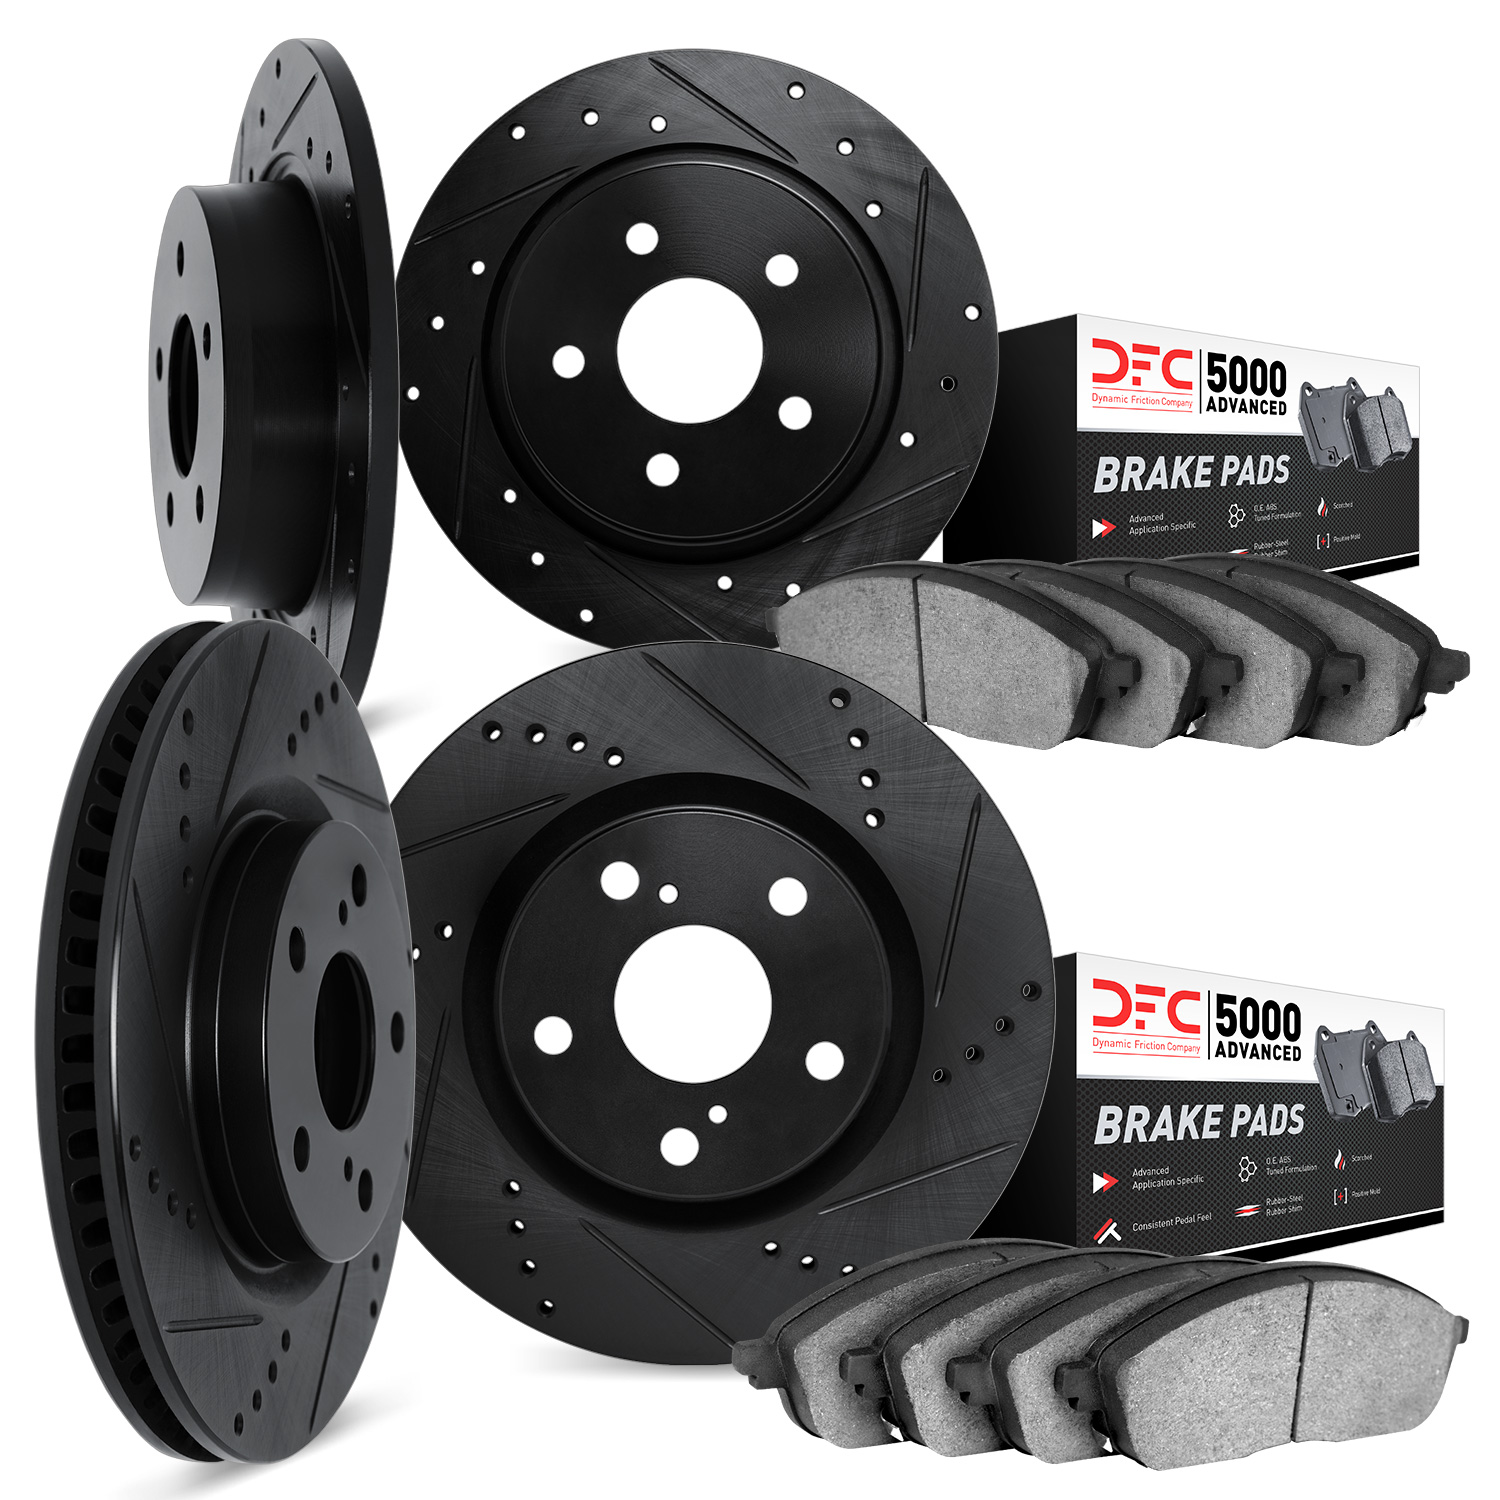 8504-72046 Drilled/Slotted Brake Rotors w/5000 Advanced Brake Pads Kit [Black], 2004-2012 Mitsubishi, Position: Front and Rear